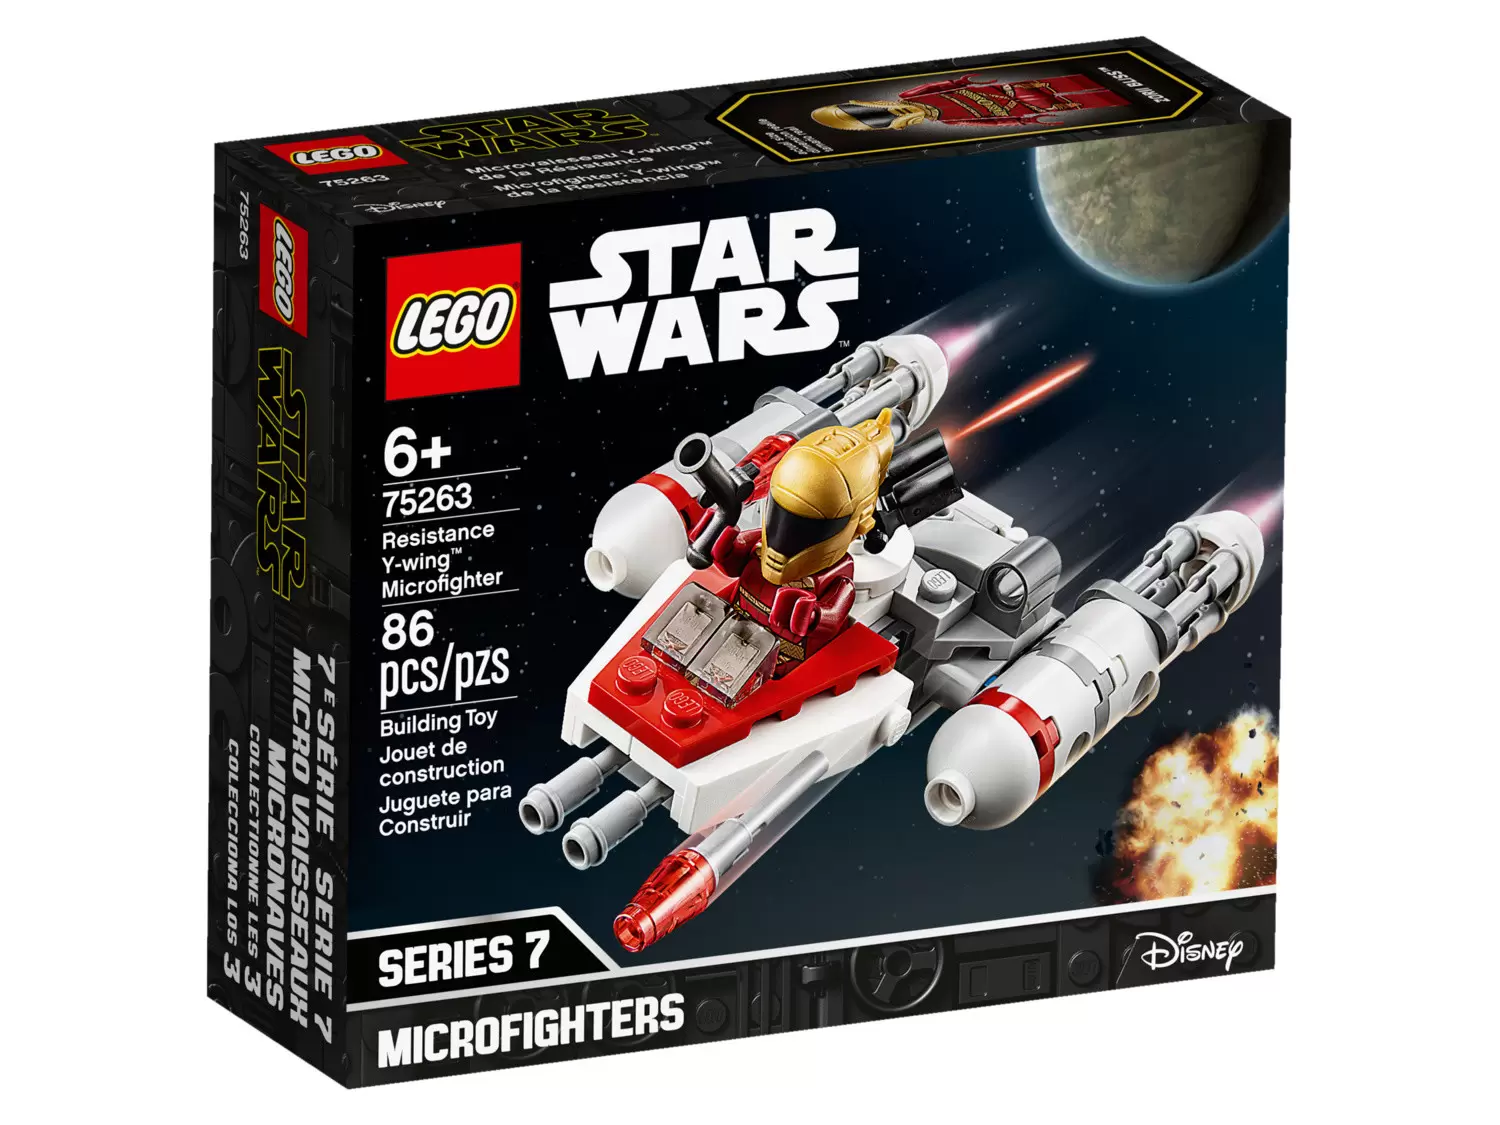 LEGO Star Wars - Resistance Y-wing Microfighter